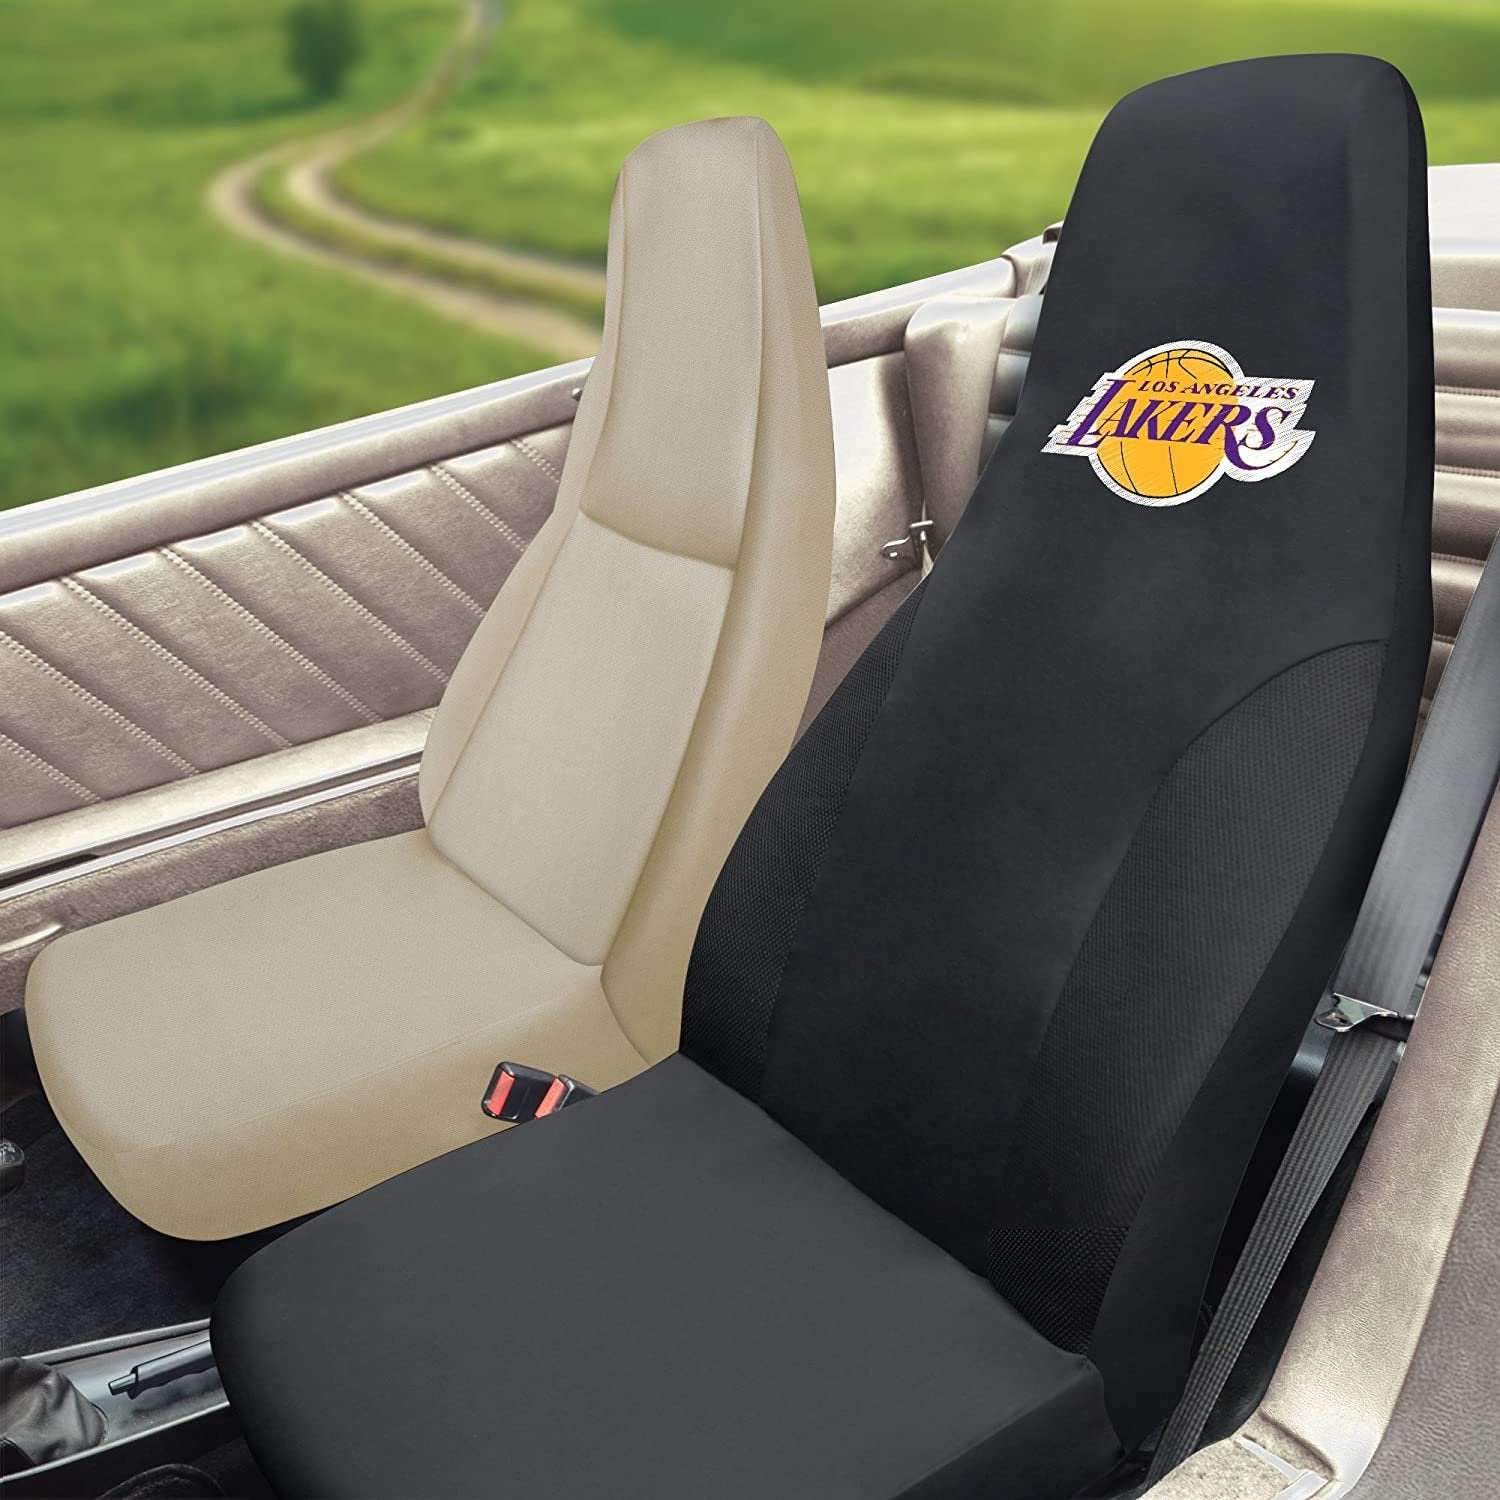 FANMATS 14967 NBA Los Angeles Lakers Polyester Seat Cover,20"x48"